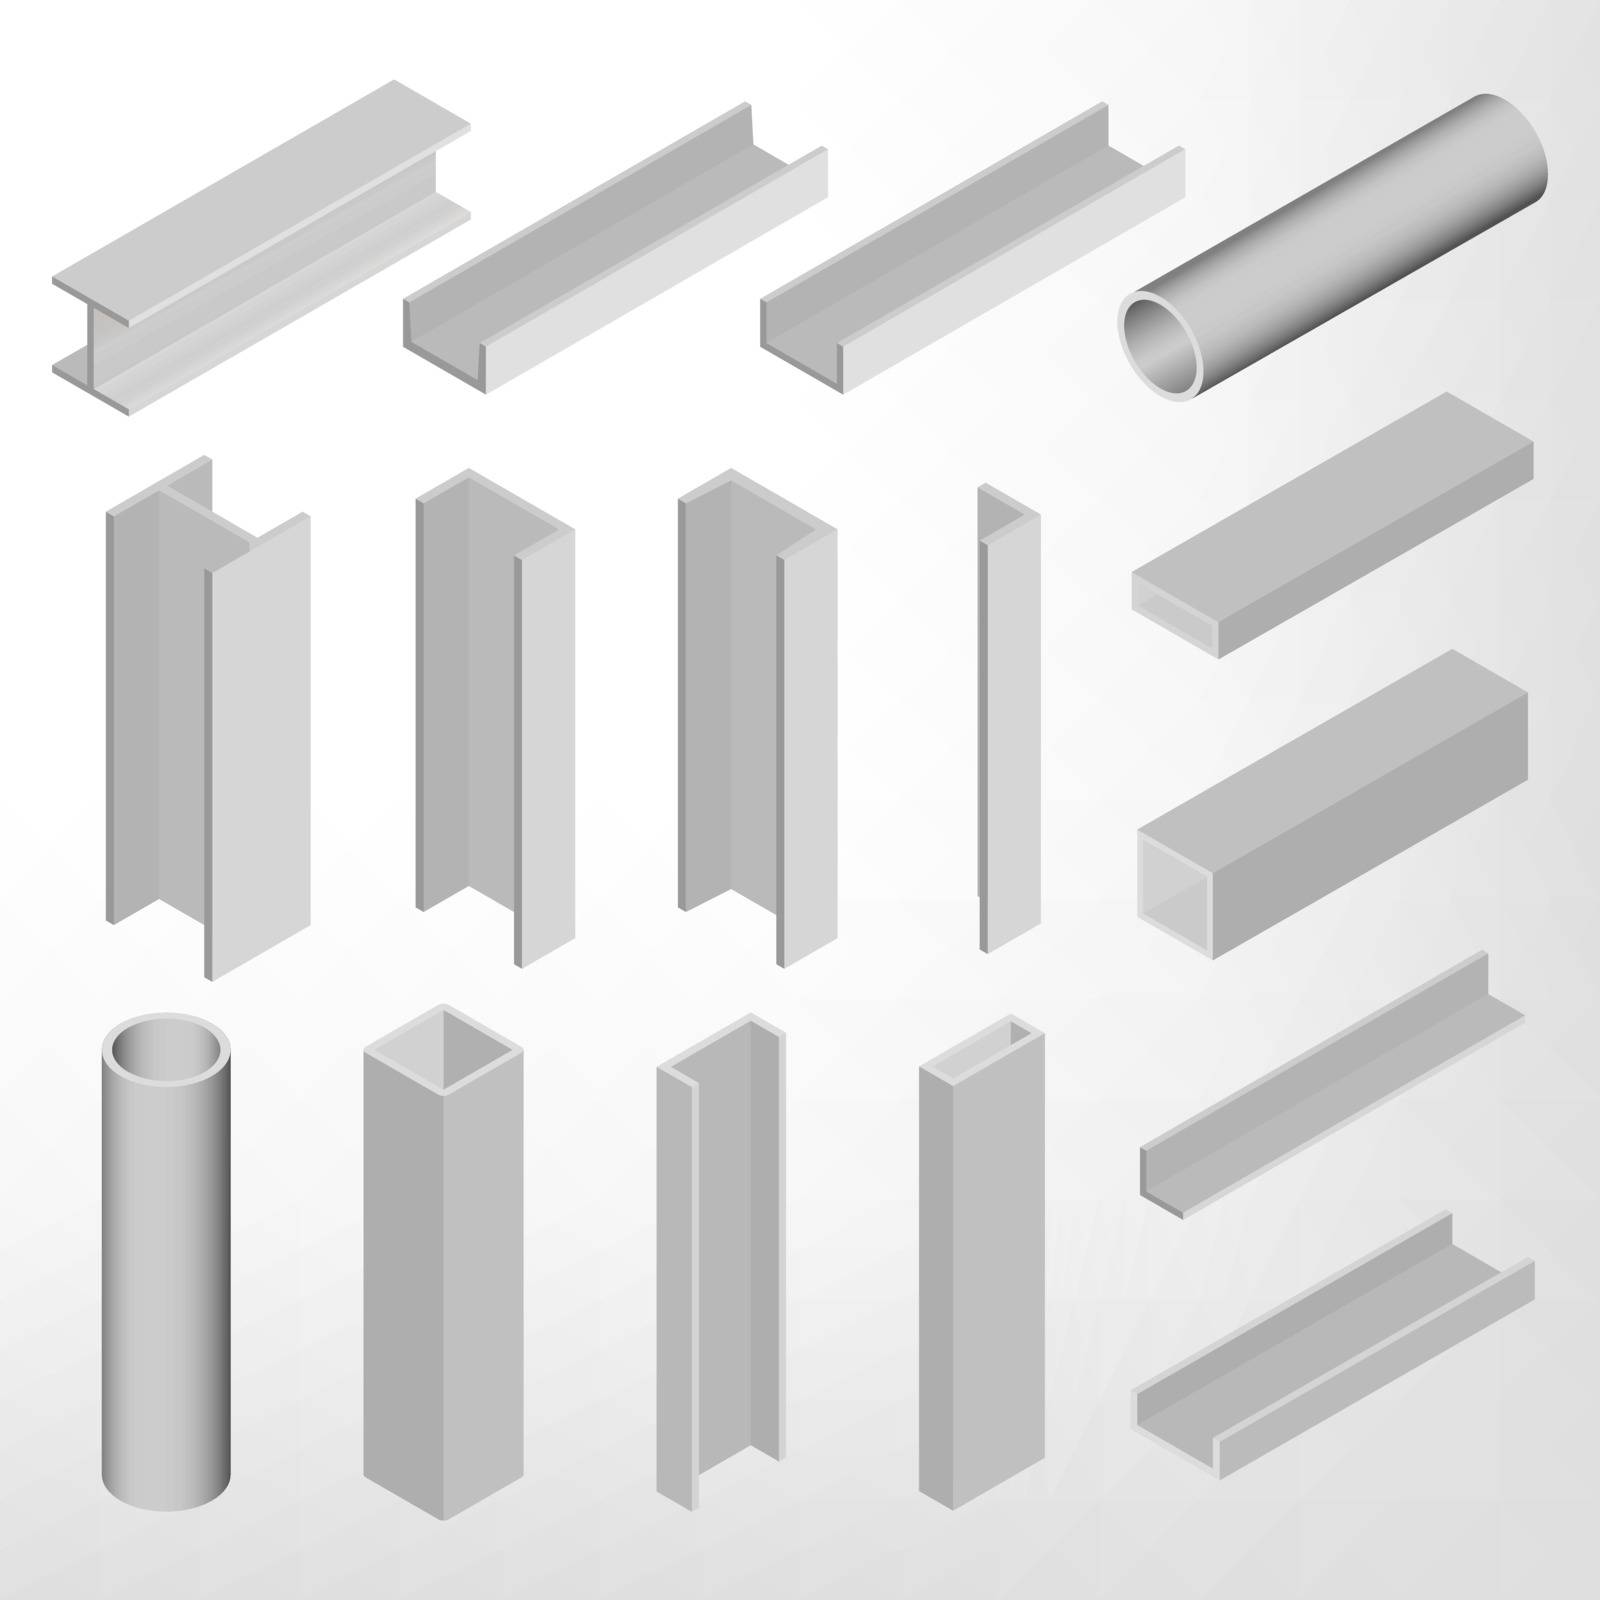 Steel beam isolated on white background. Design elements for the construction and reconstruction. Flat 3D isometric style, vector illustration.